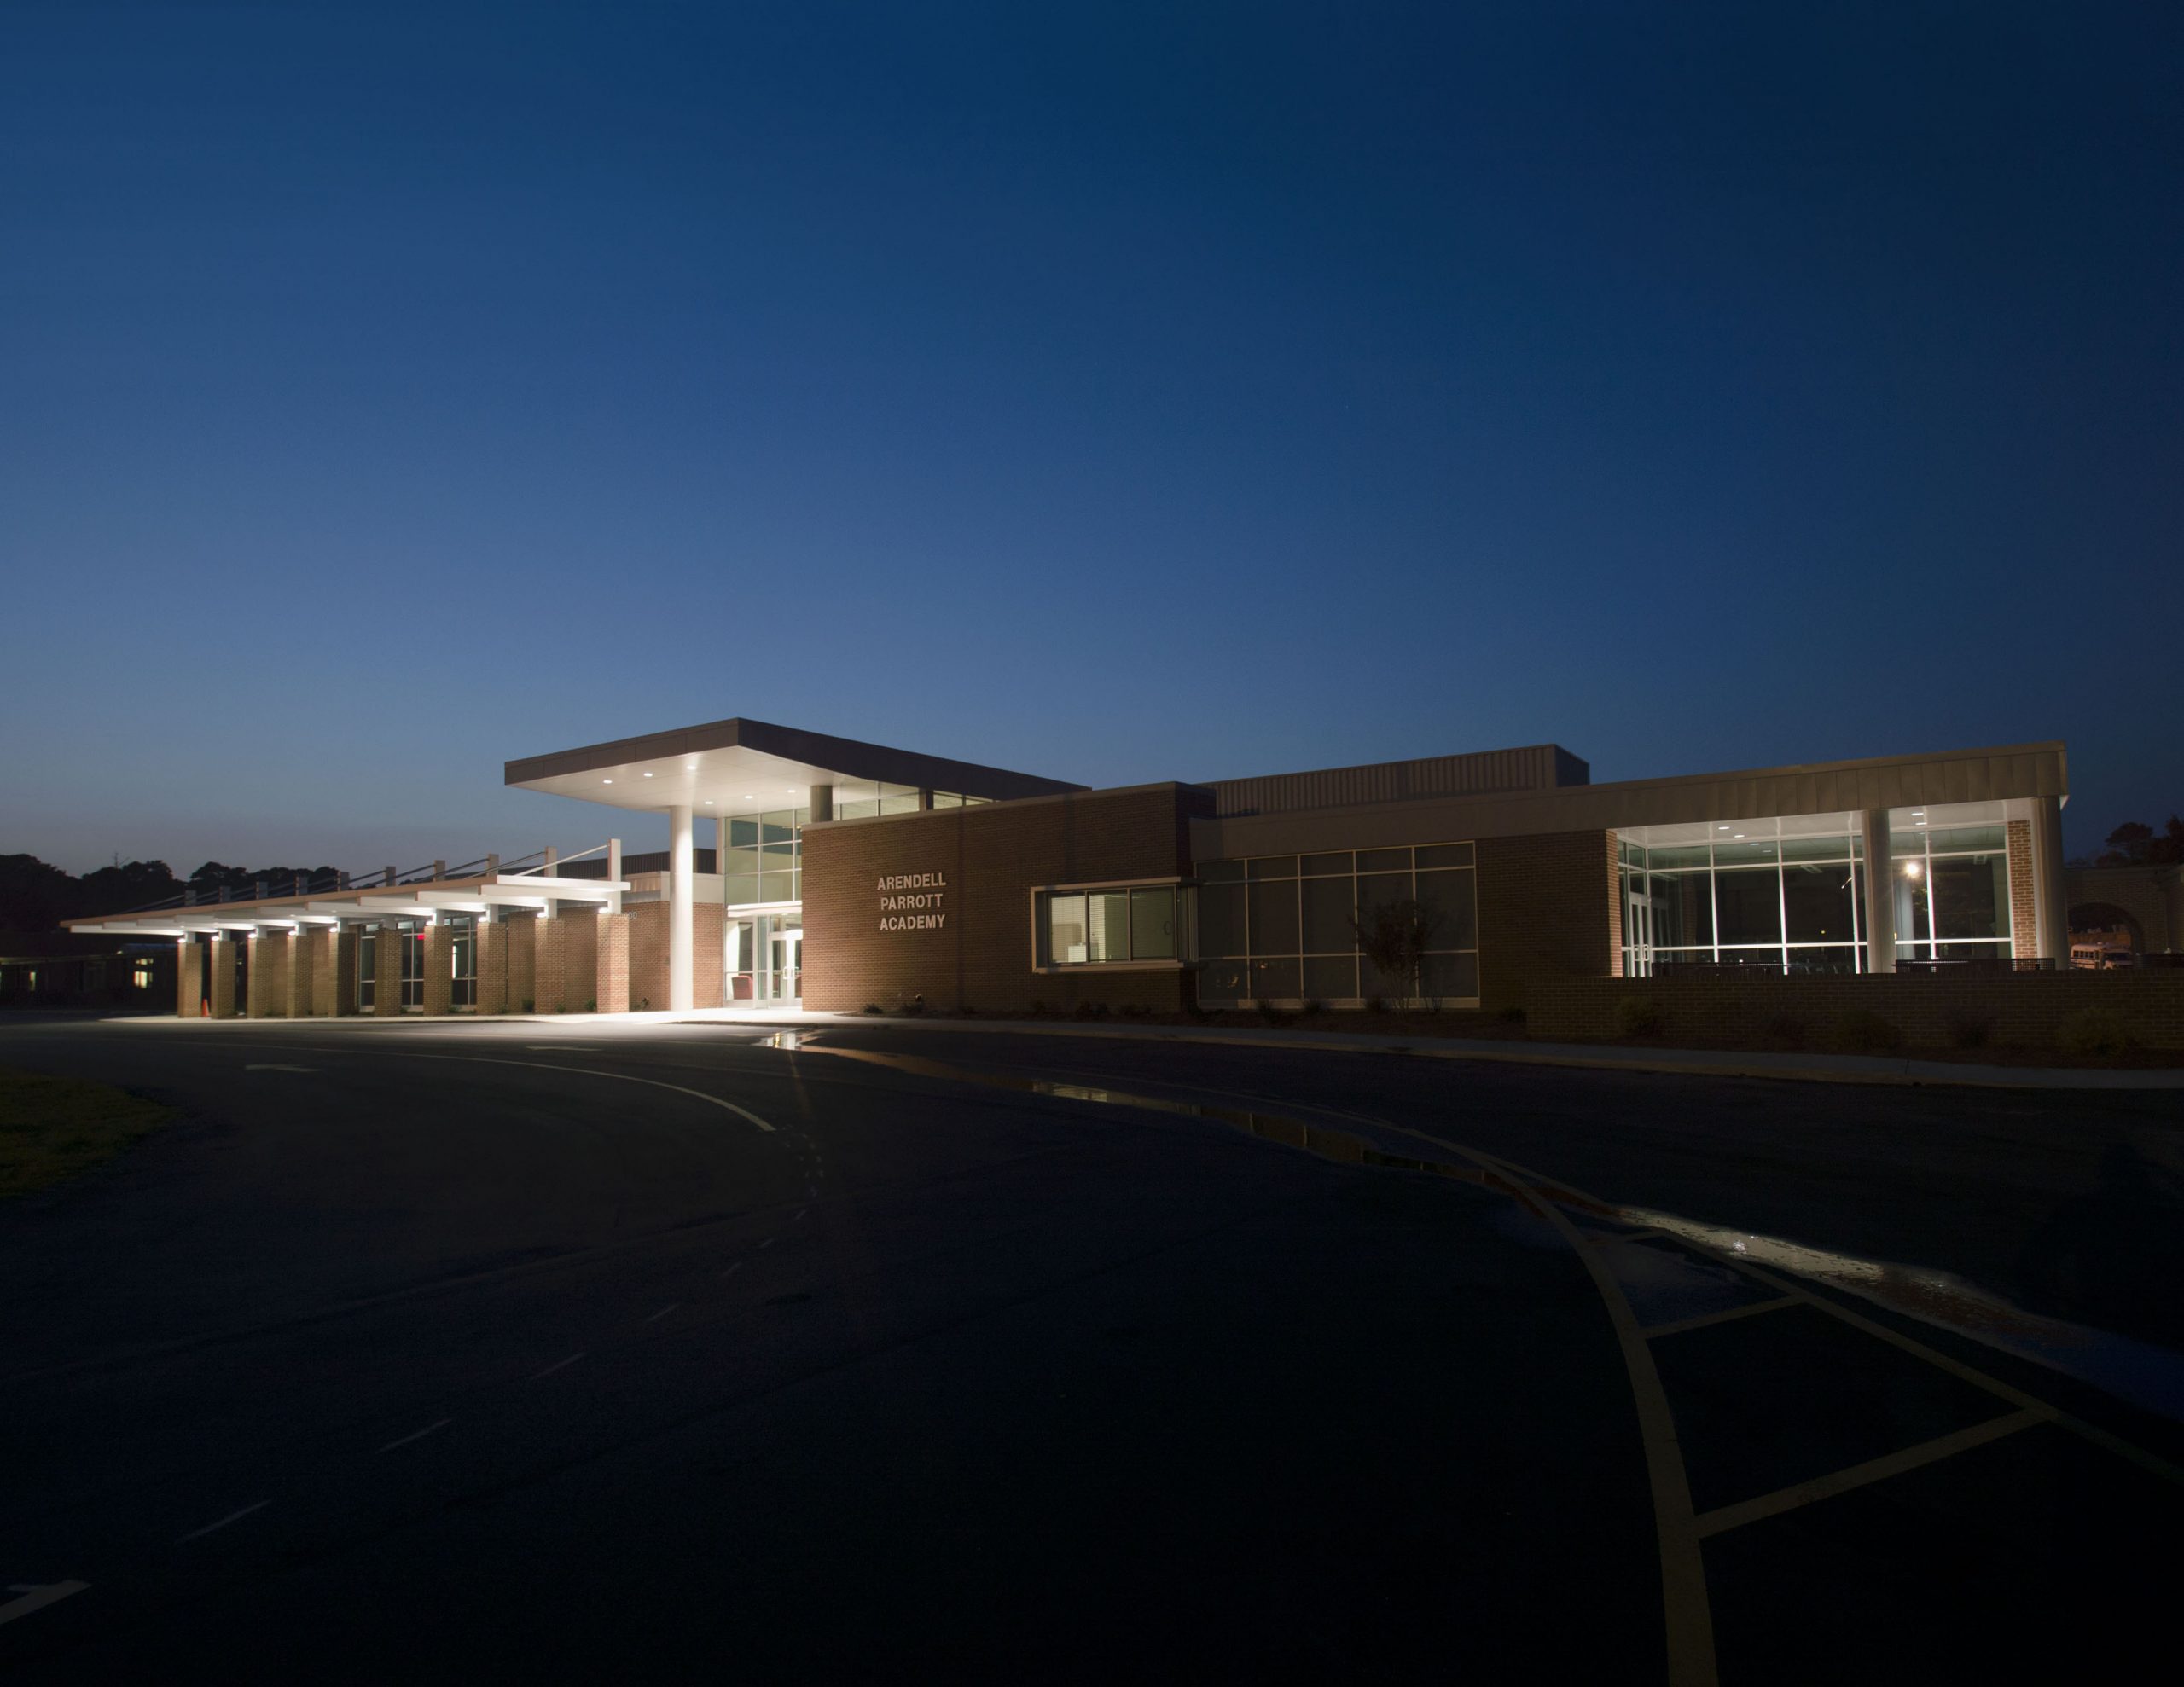 Arendell Parrott Academy at night